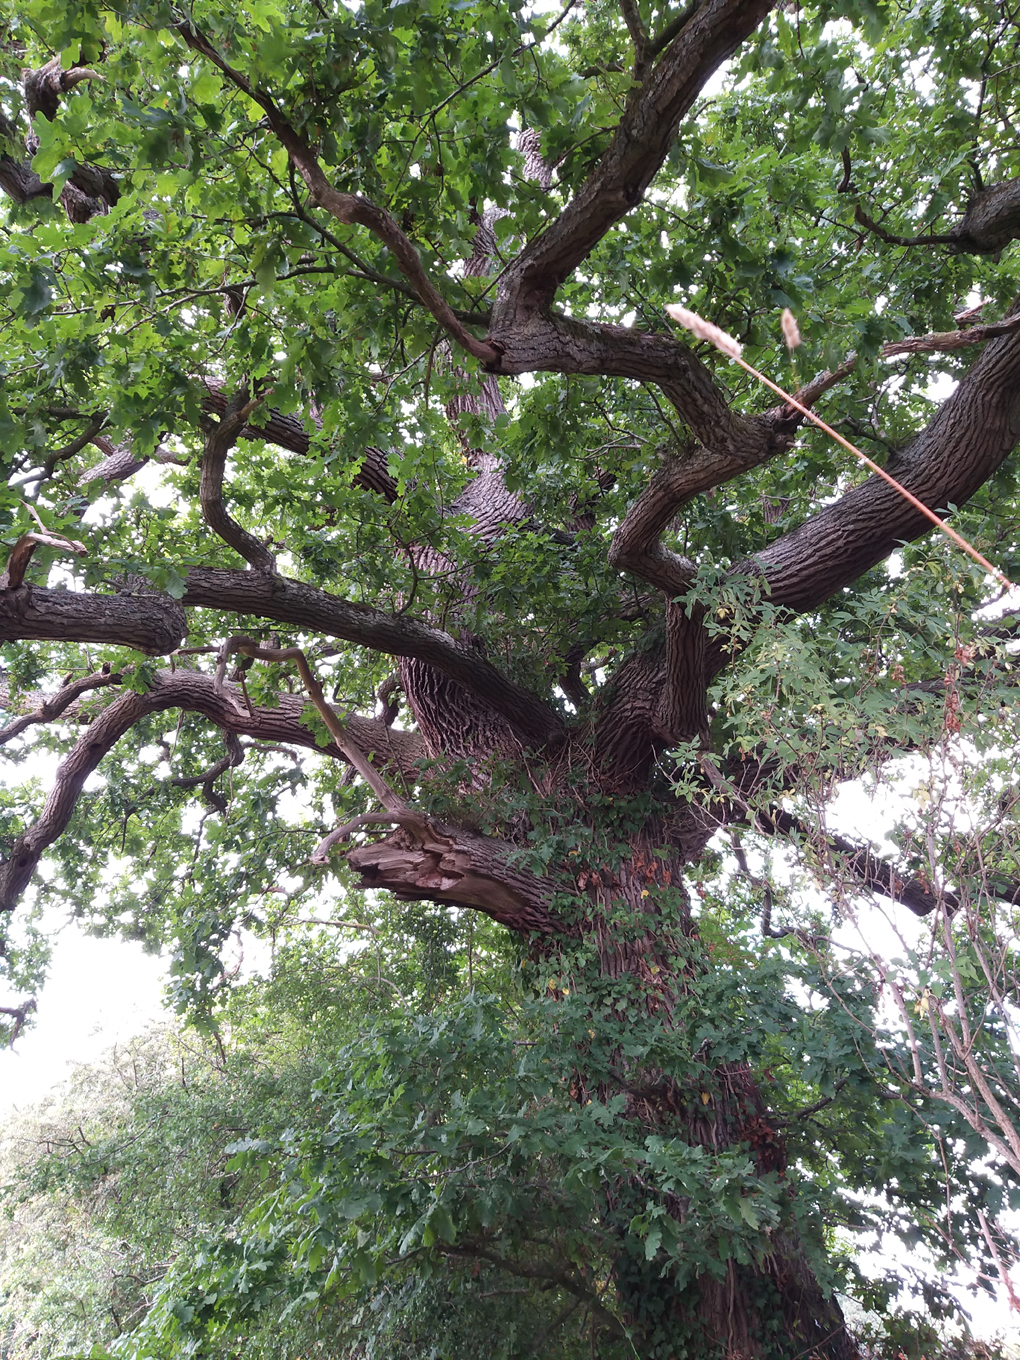 Tree (possibly oak?) with leaves. Pic taken from the ground looking up